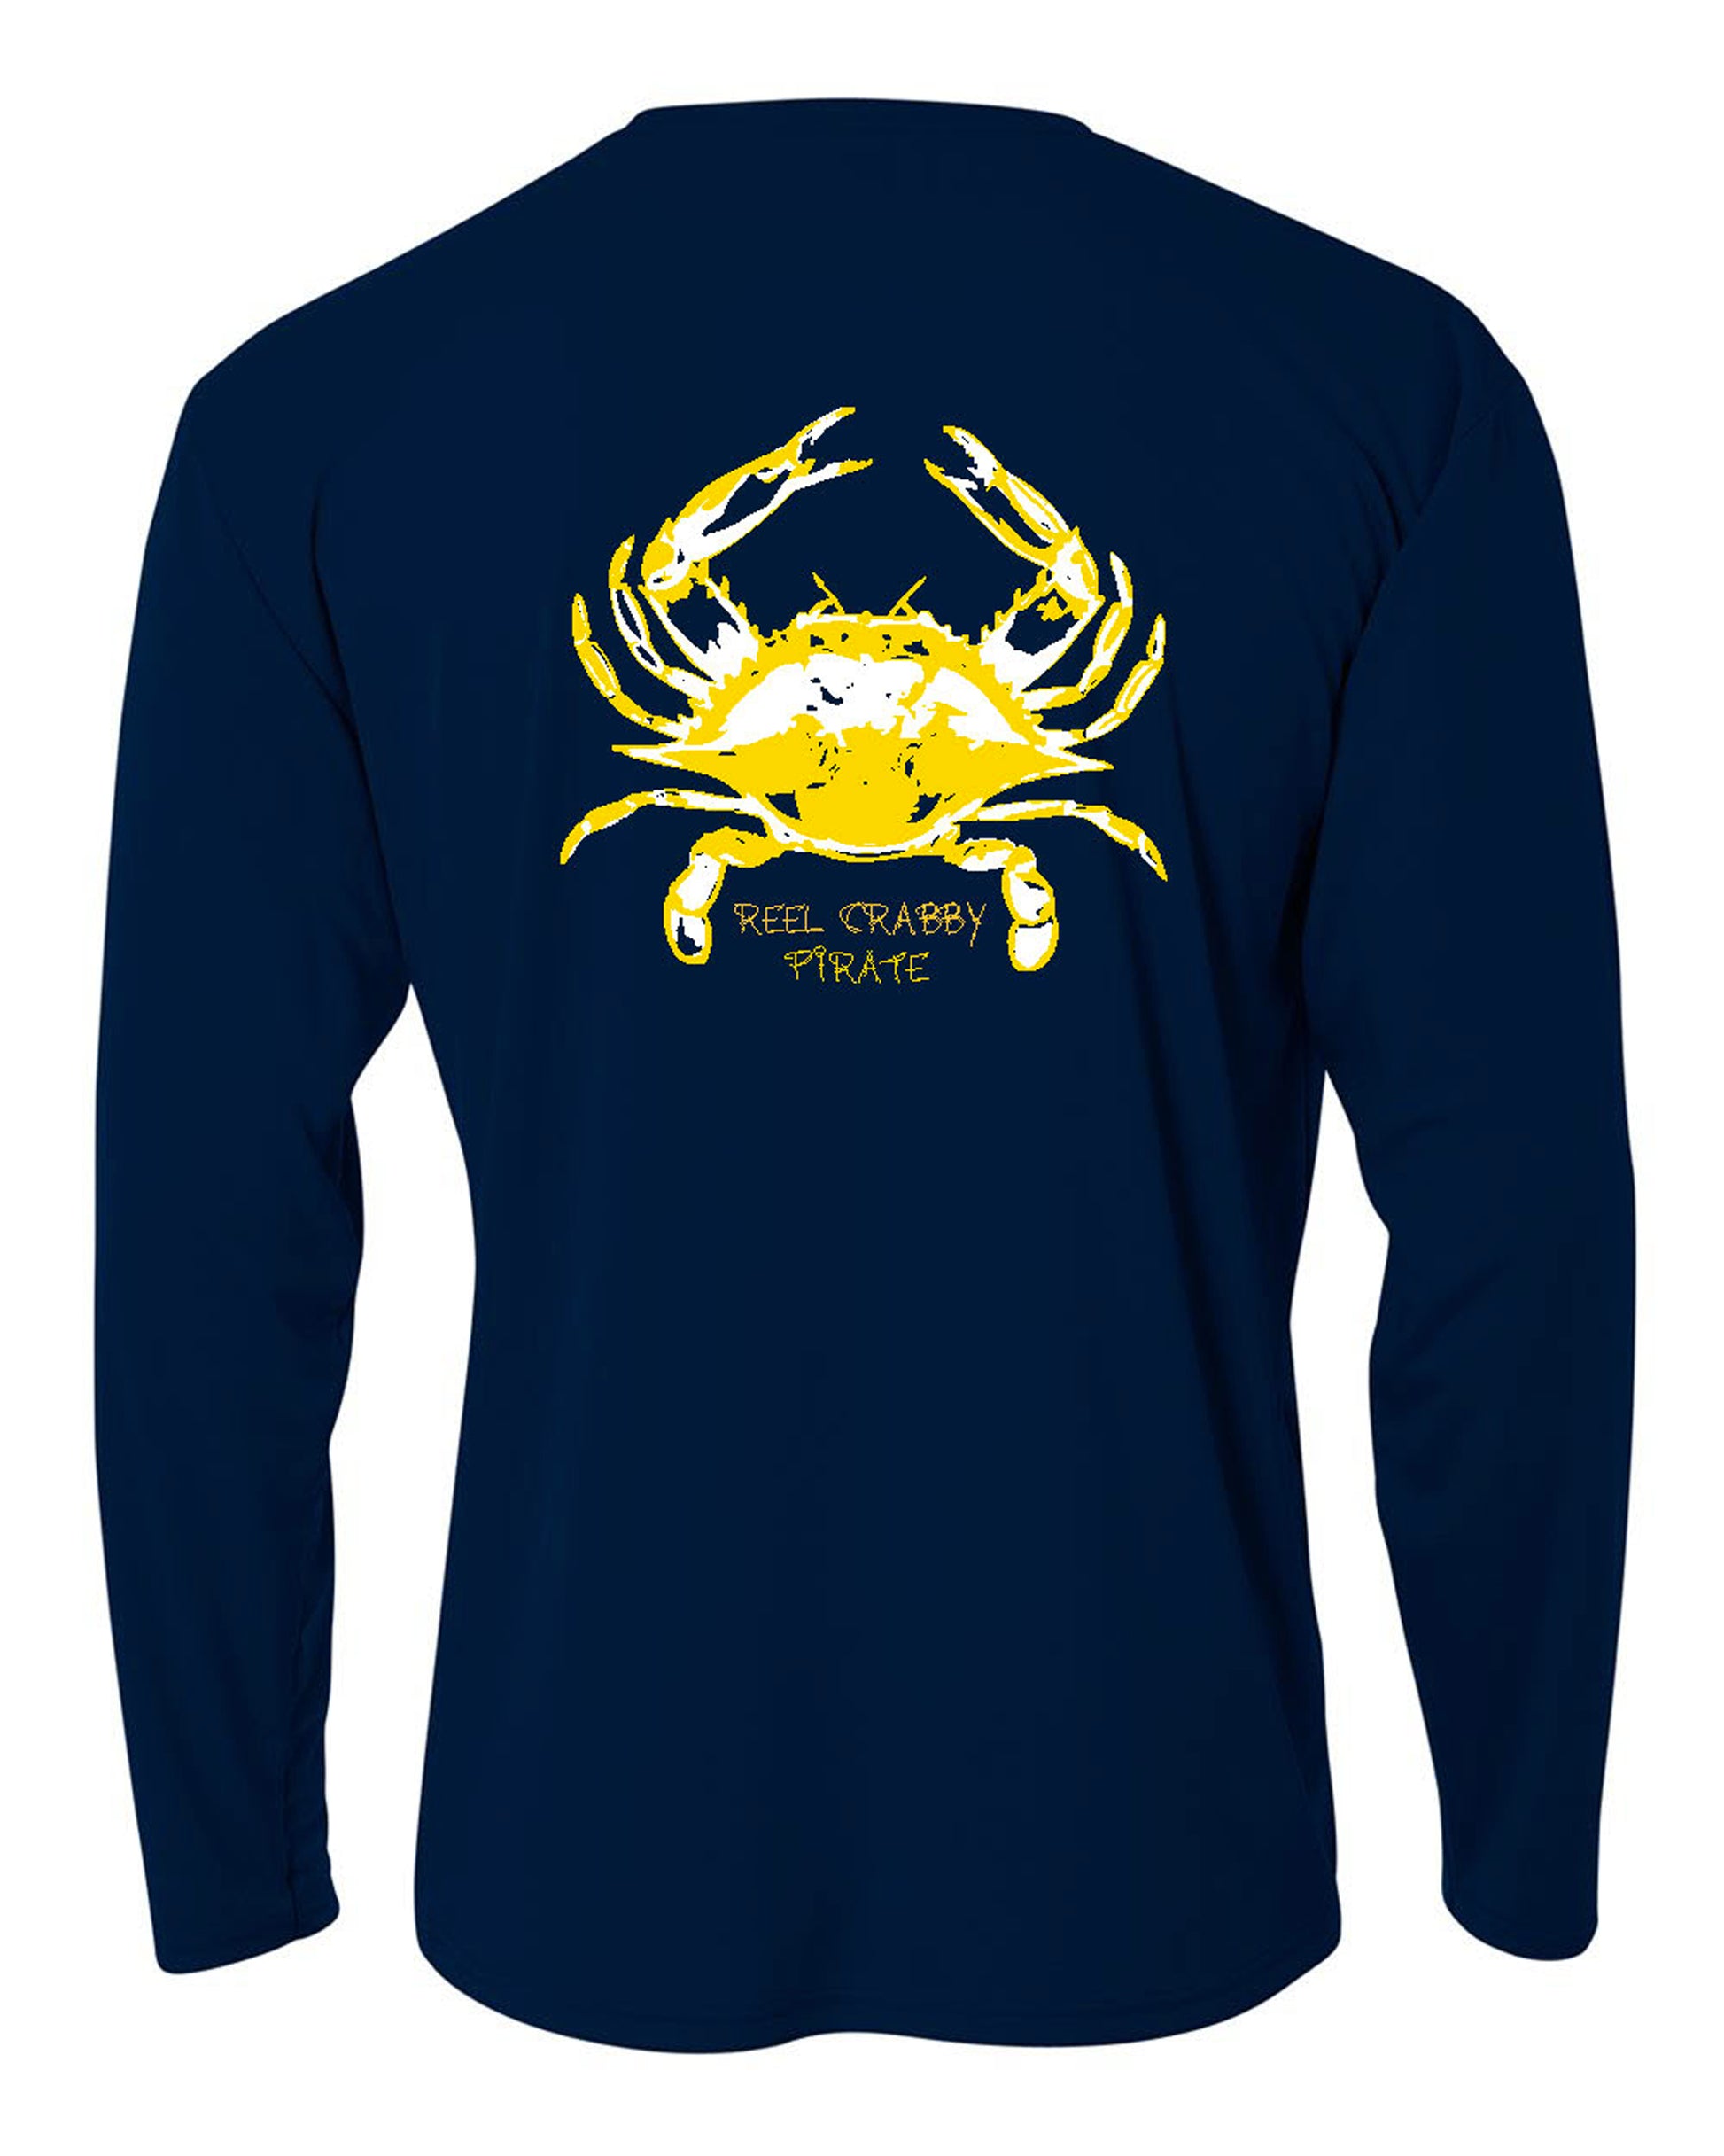 Navy Youth Crab "Reel Crabby Pirate" Long Sleeve Performance Dry-Fit Shirts with Sun Protection by Reel Fishy Apparel